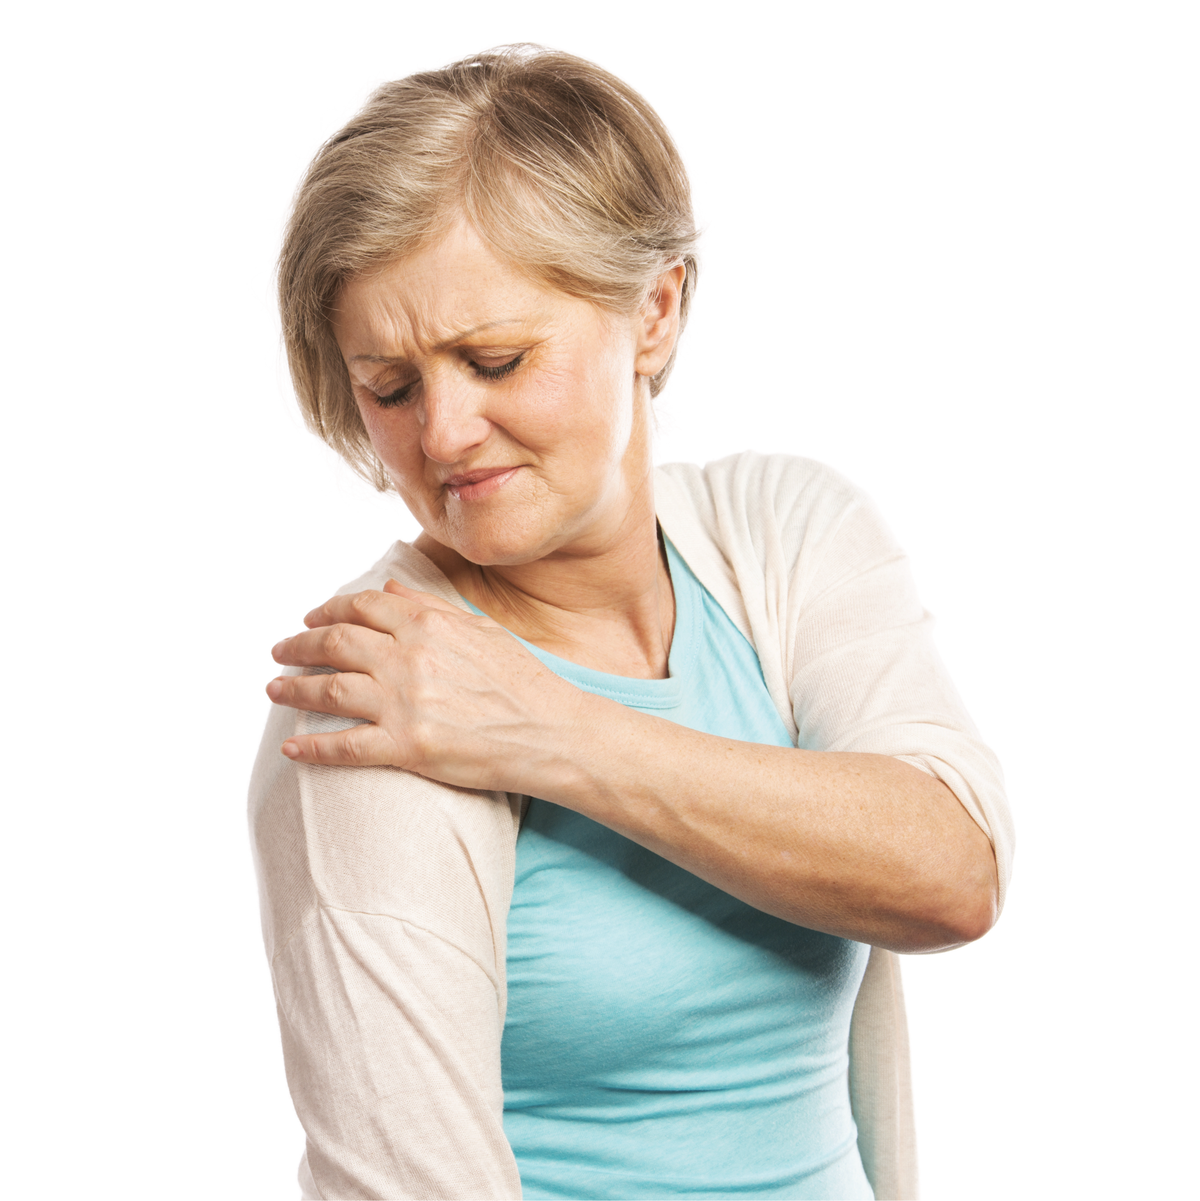 An elderly woman with shoulder pain